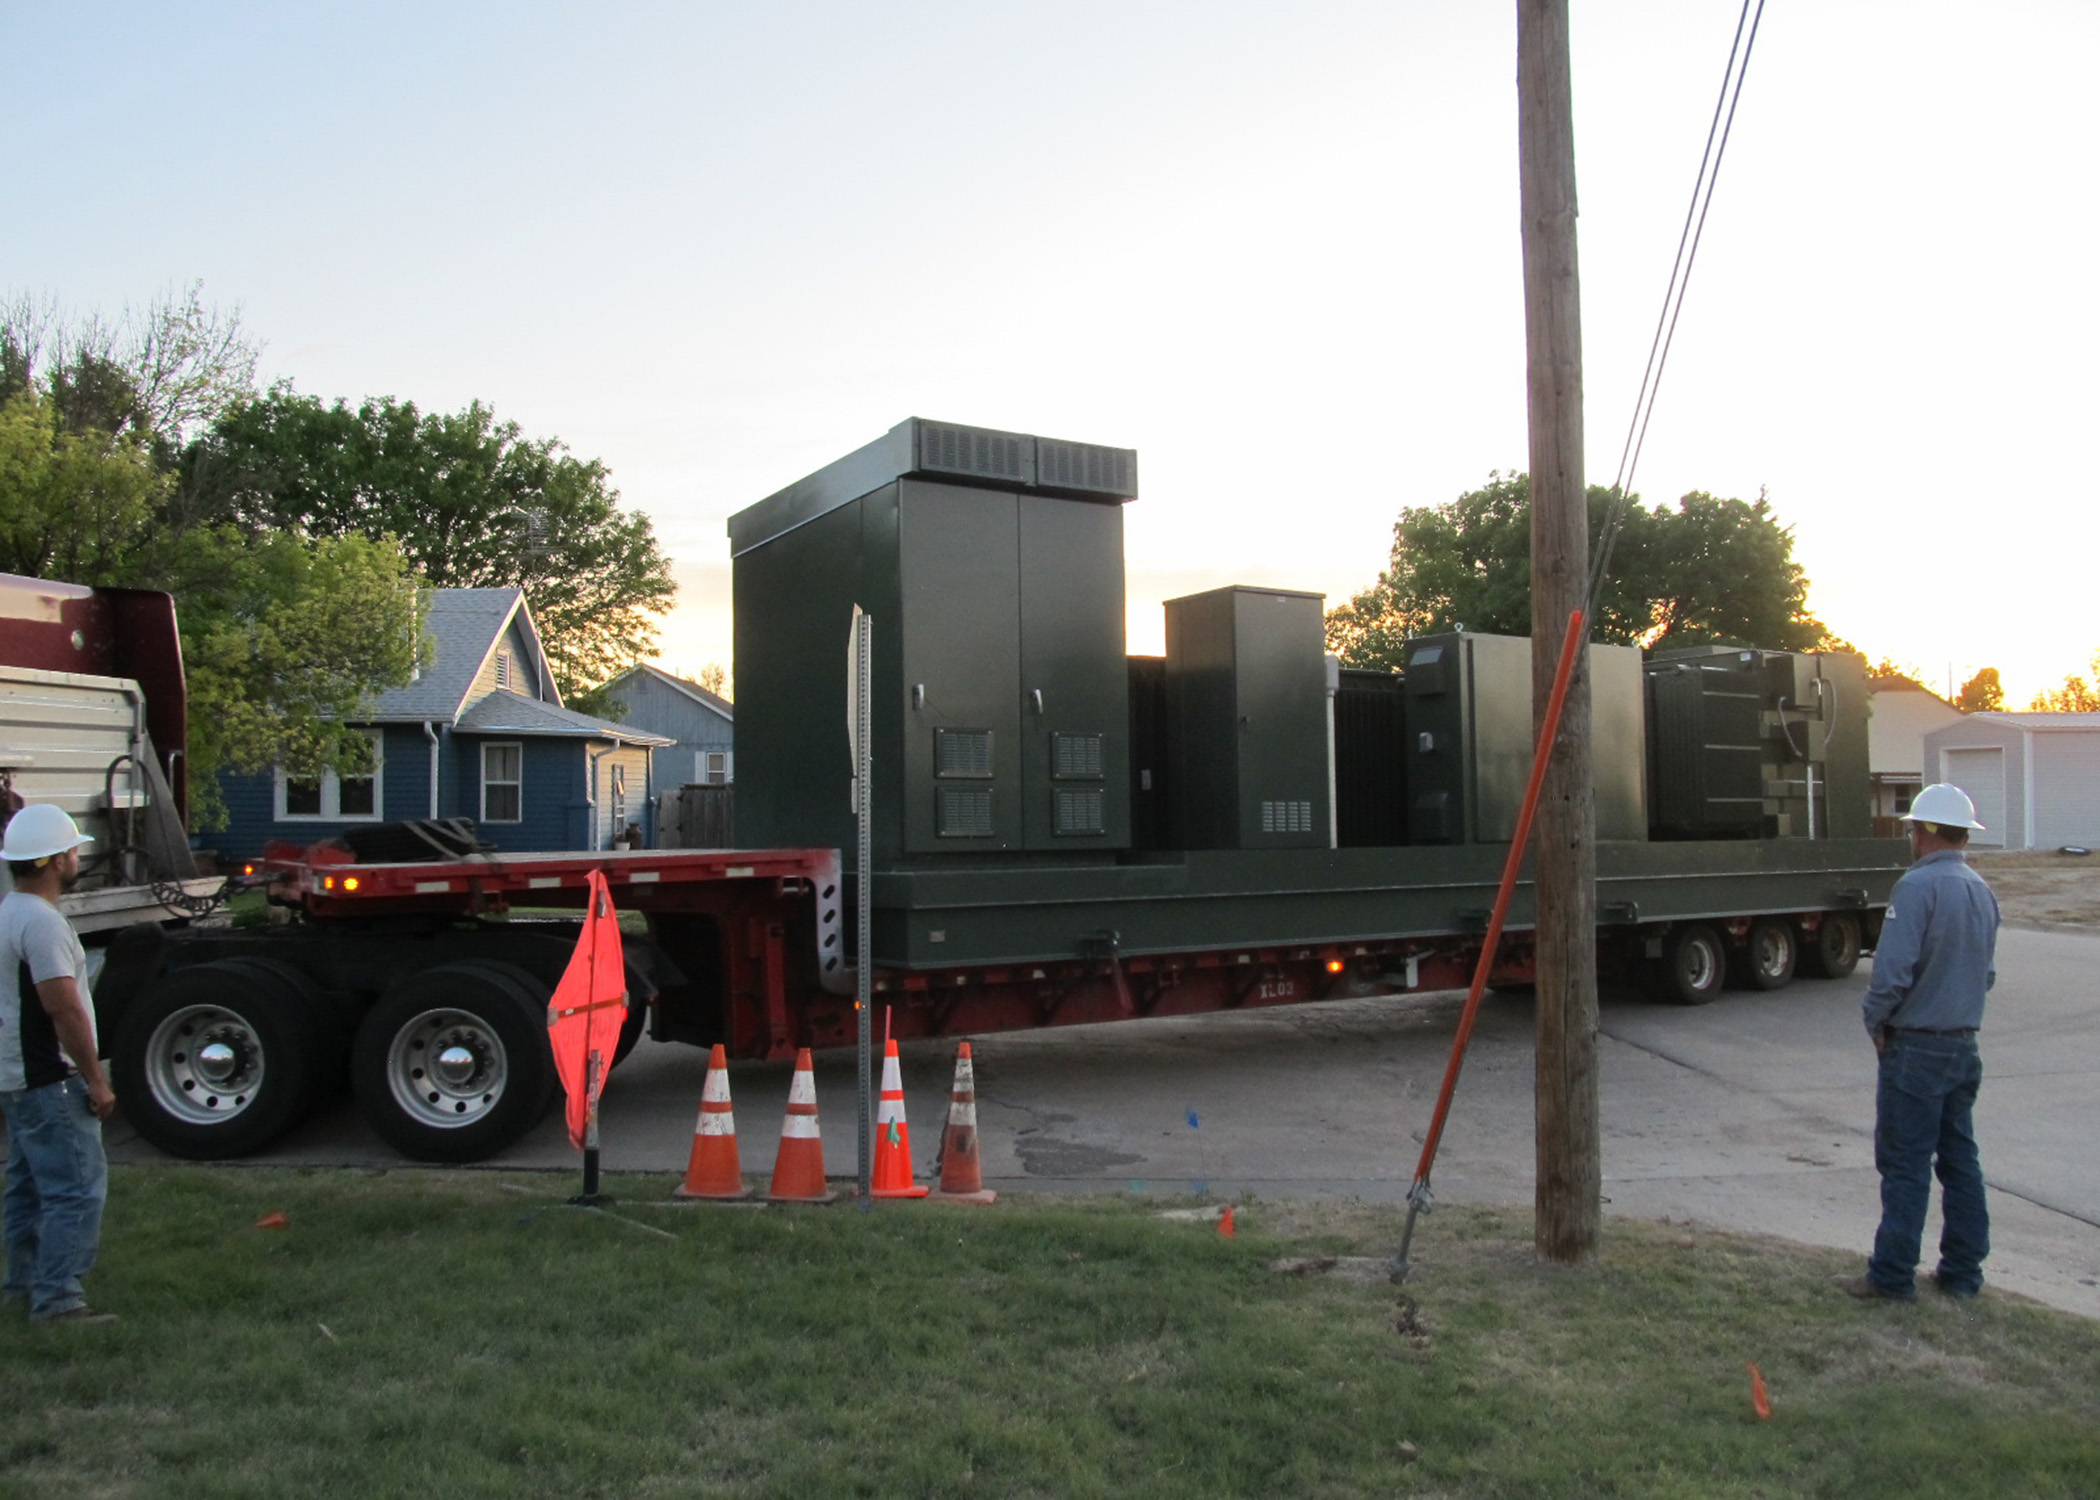 A skid-mounted substation, consisting of large green transformers and switch boxes, sits atop a flatbed semi trailer, waiting to be lifted into place.